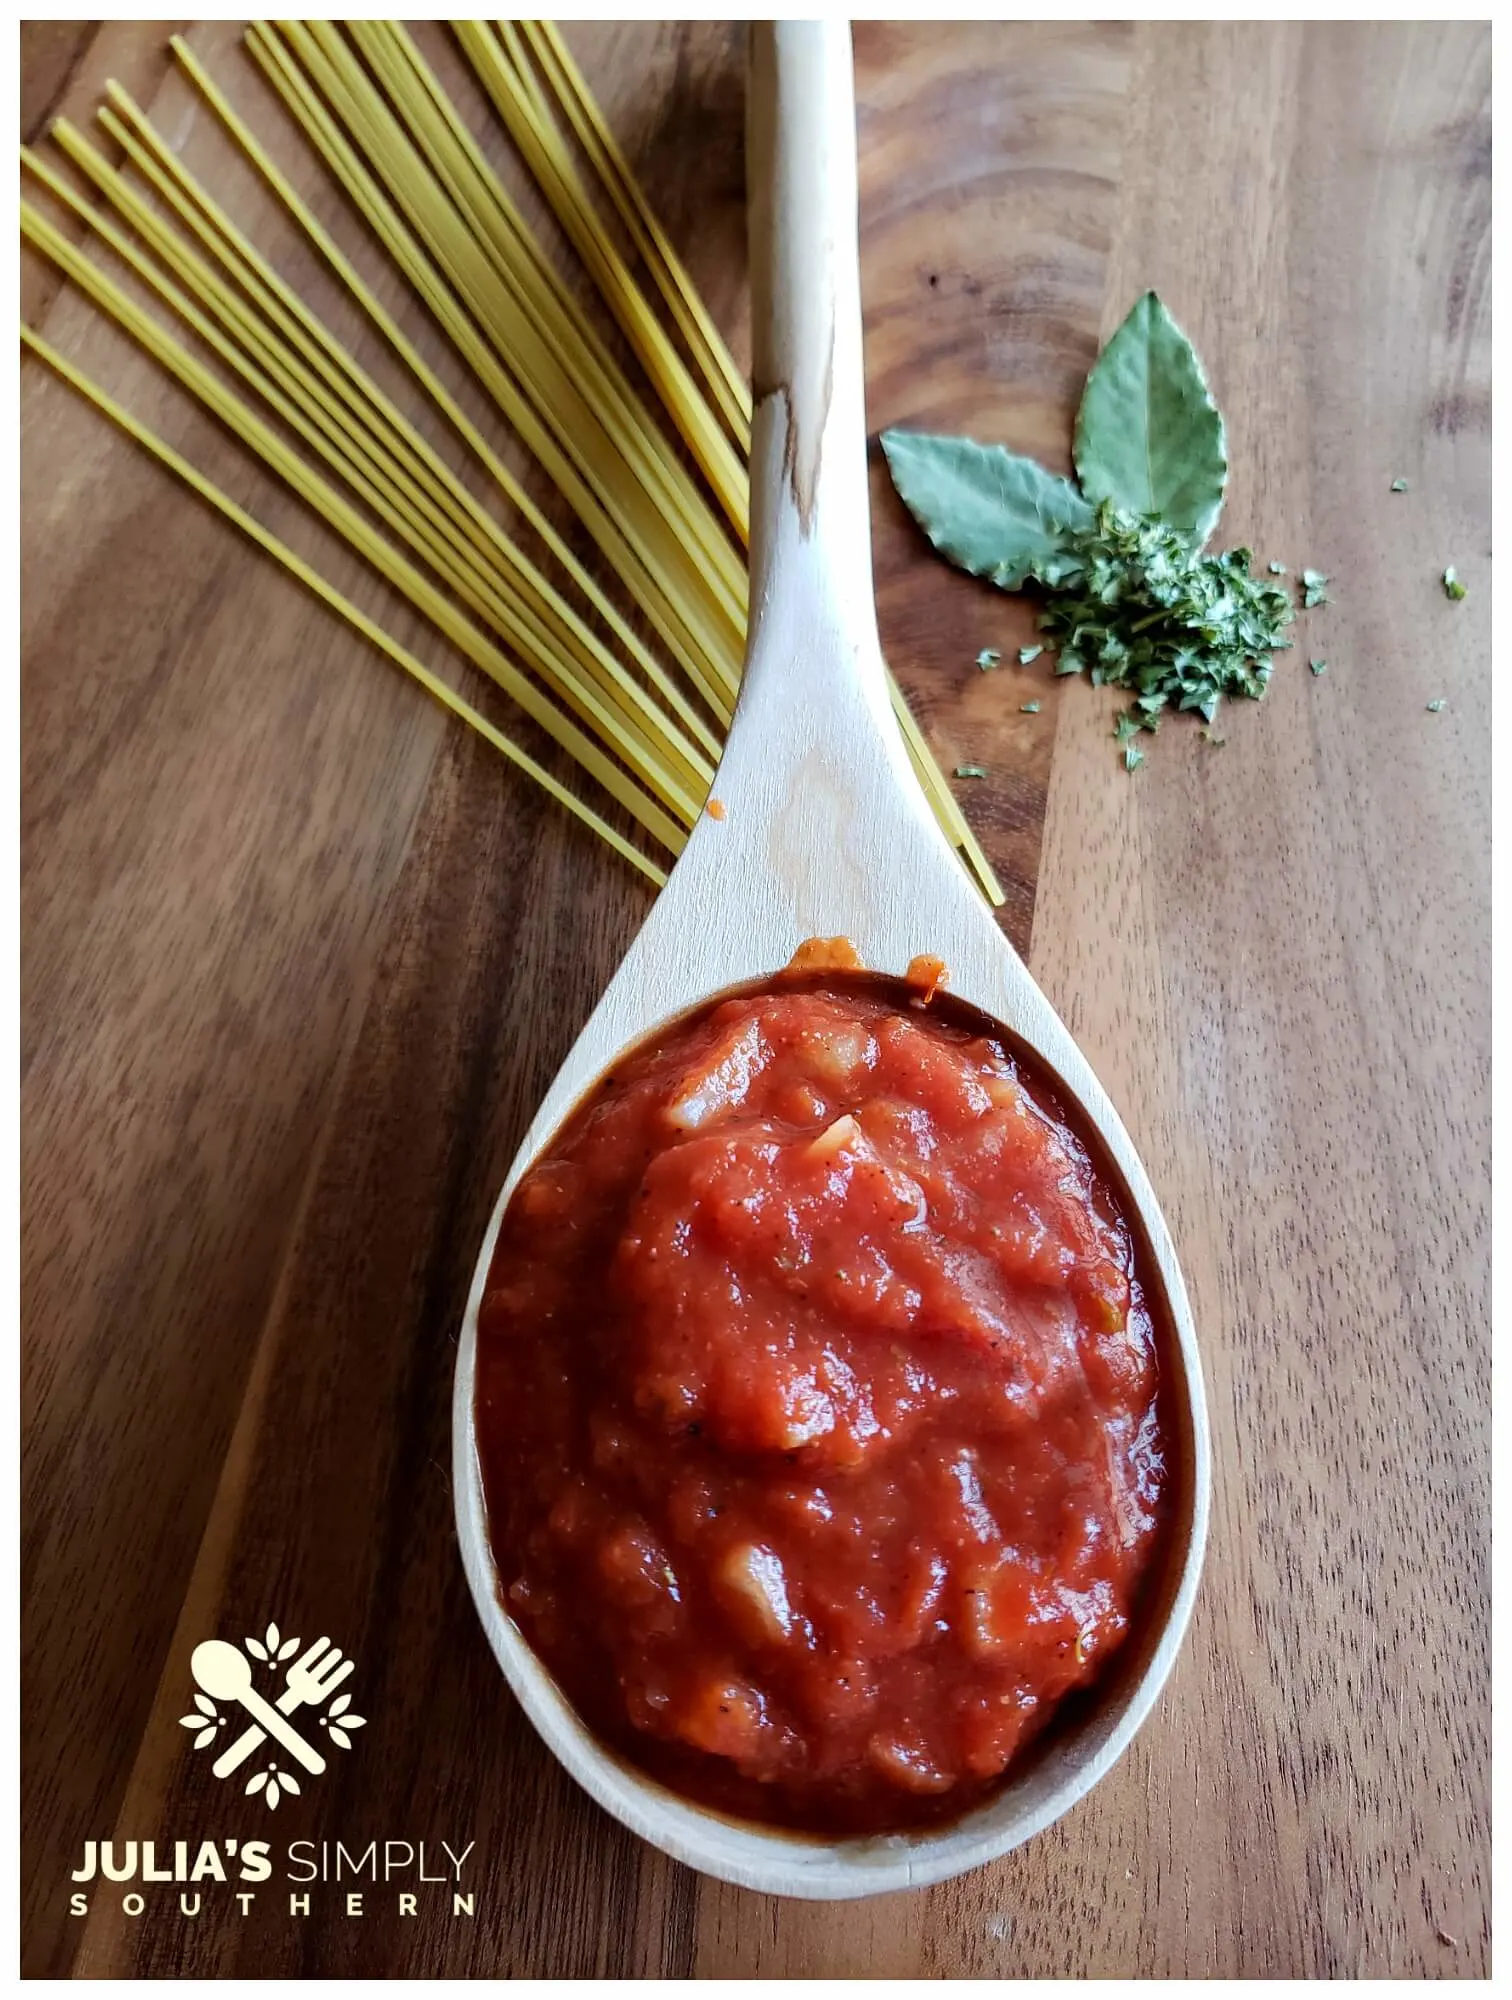 Homemade Sauce for pasta or for dipping made 